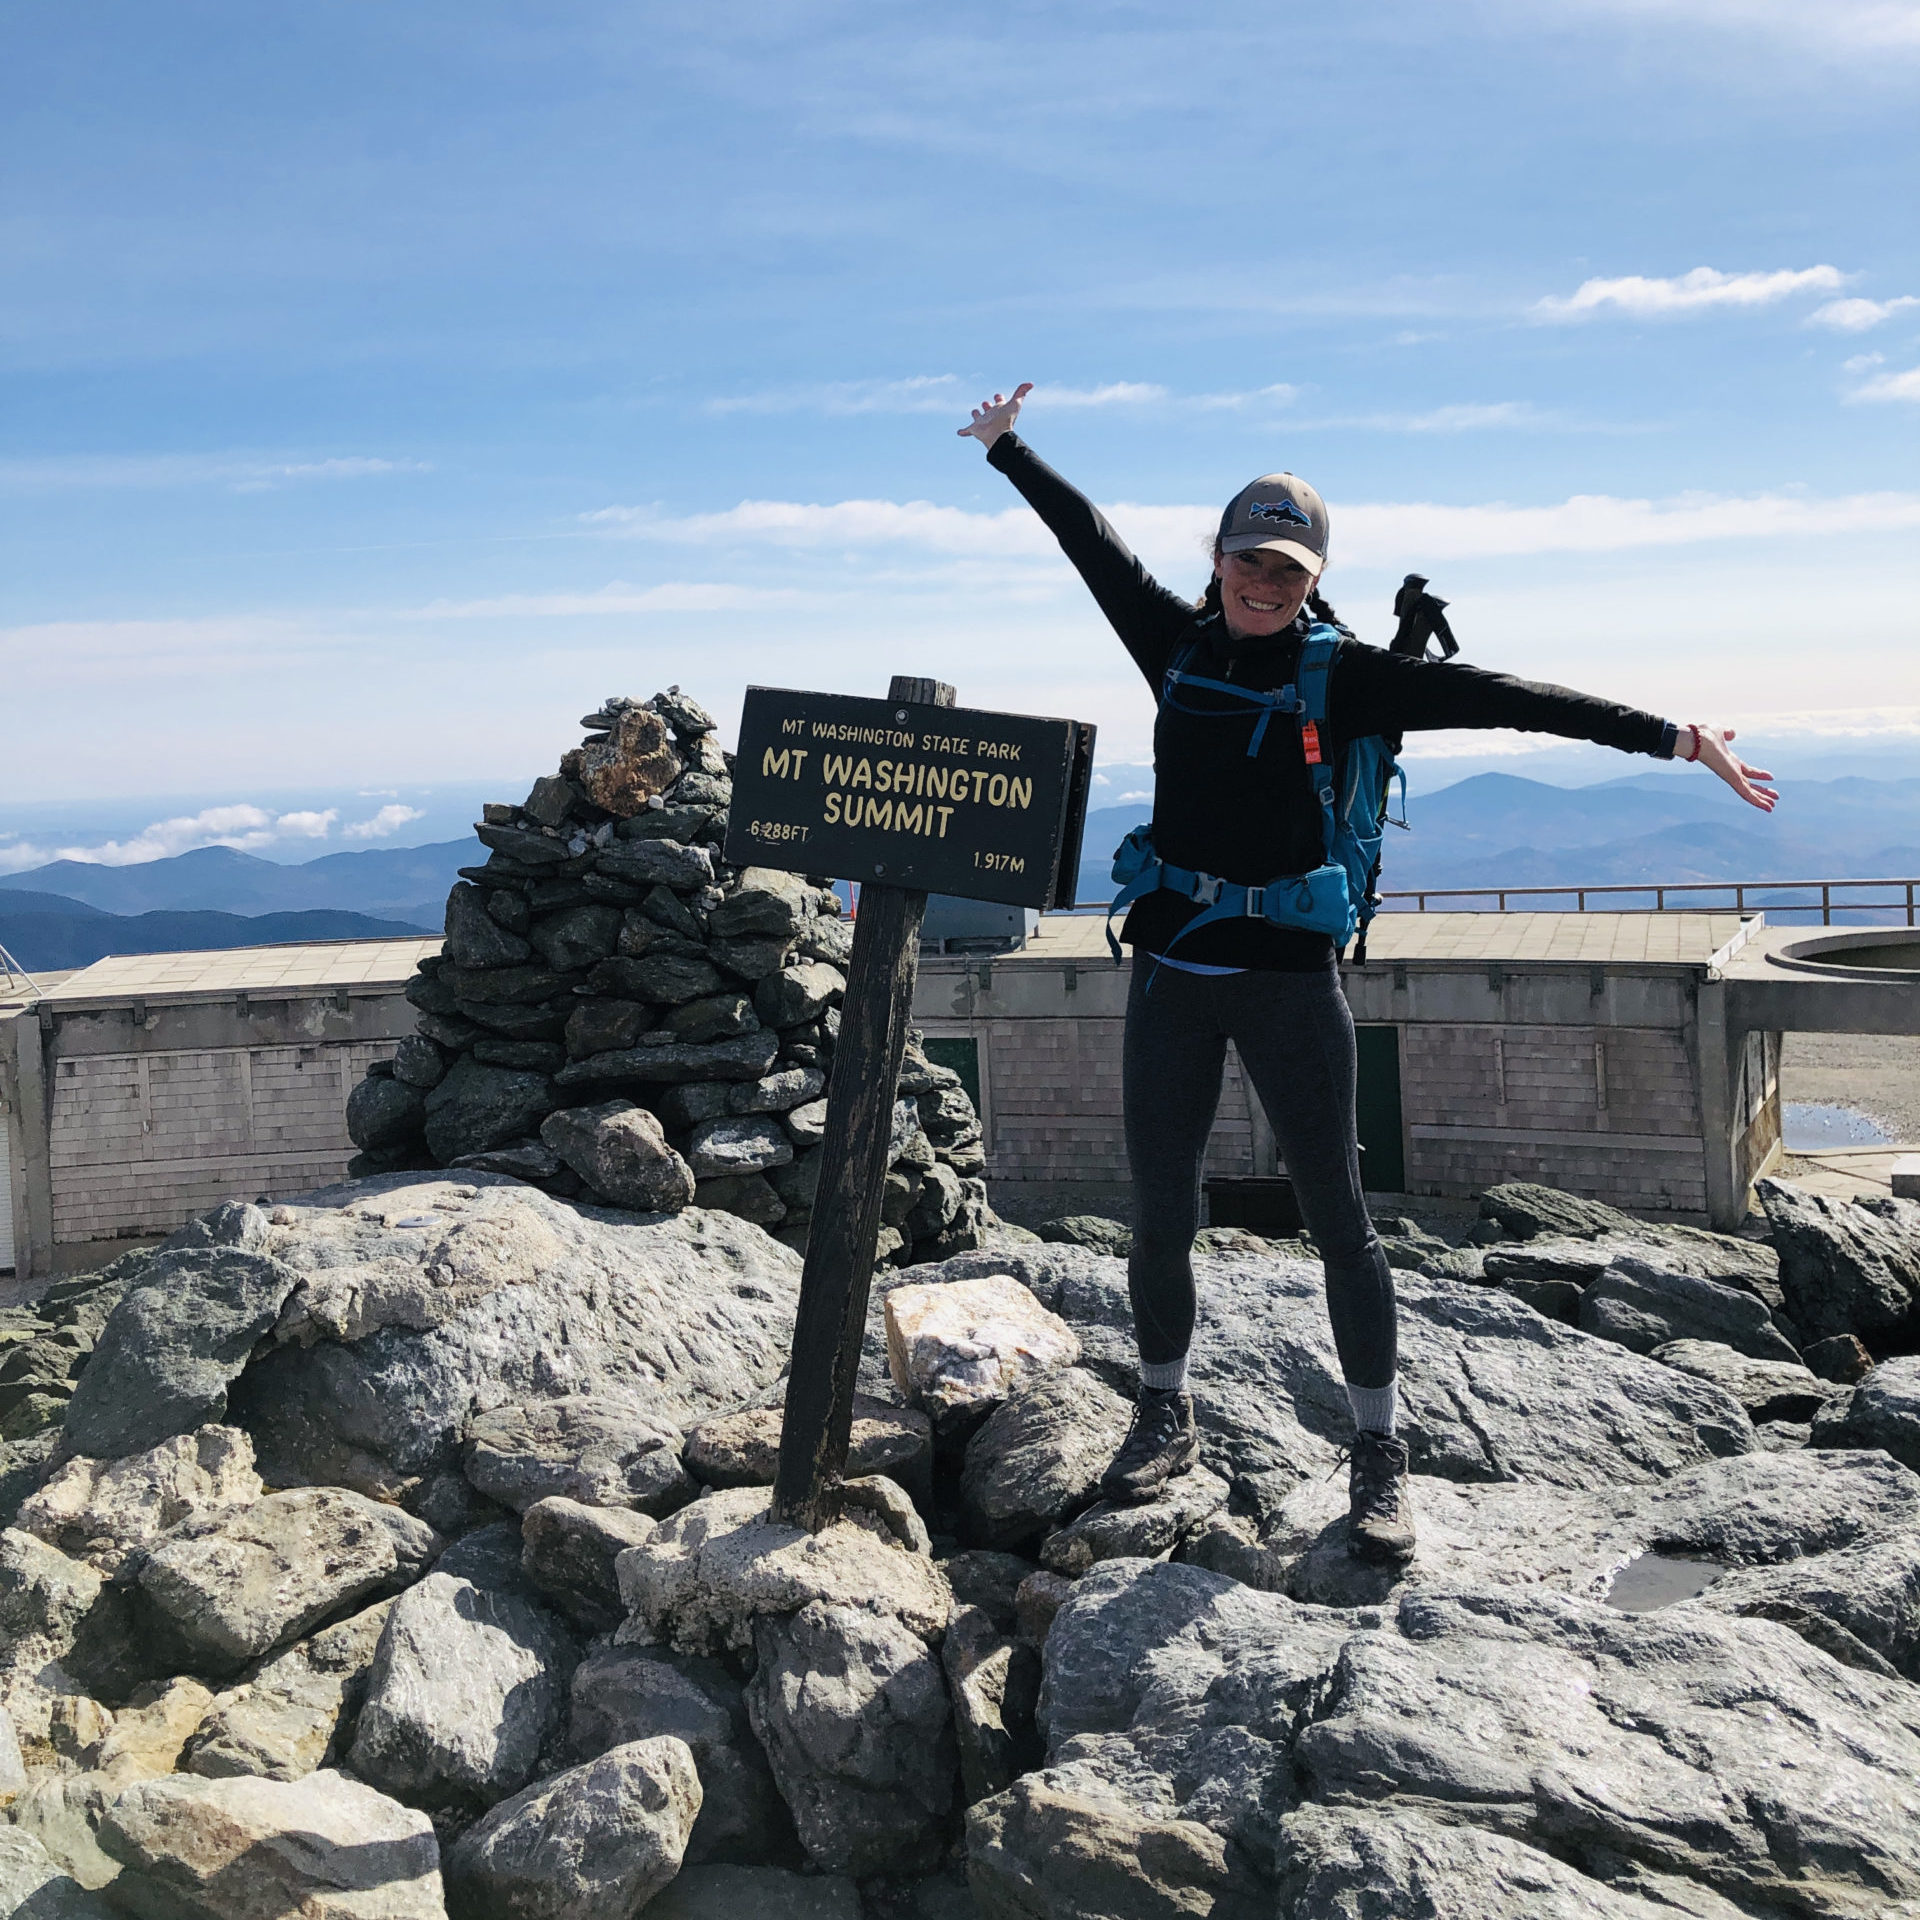 Sarah Holman at the top of Mt Washington in the White Mountains, New Hampshire